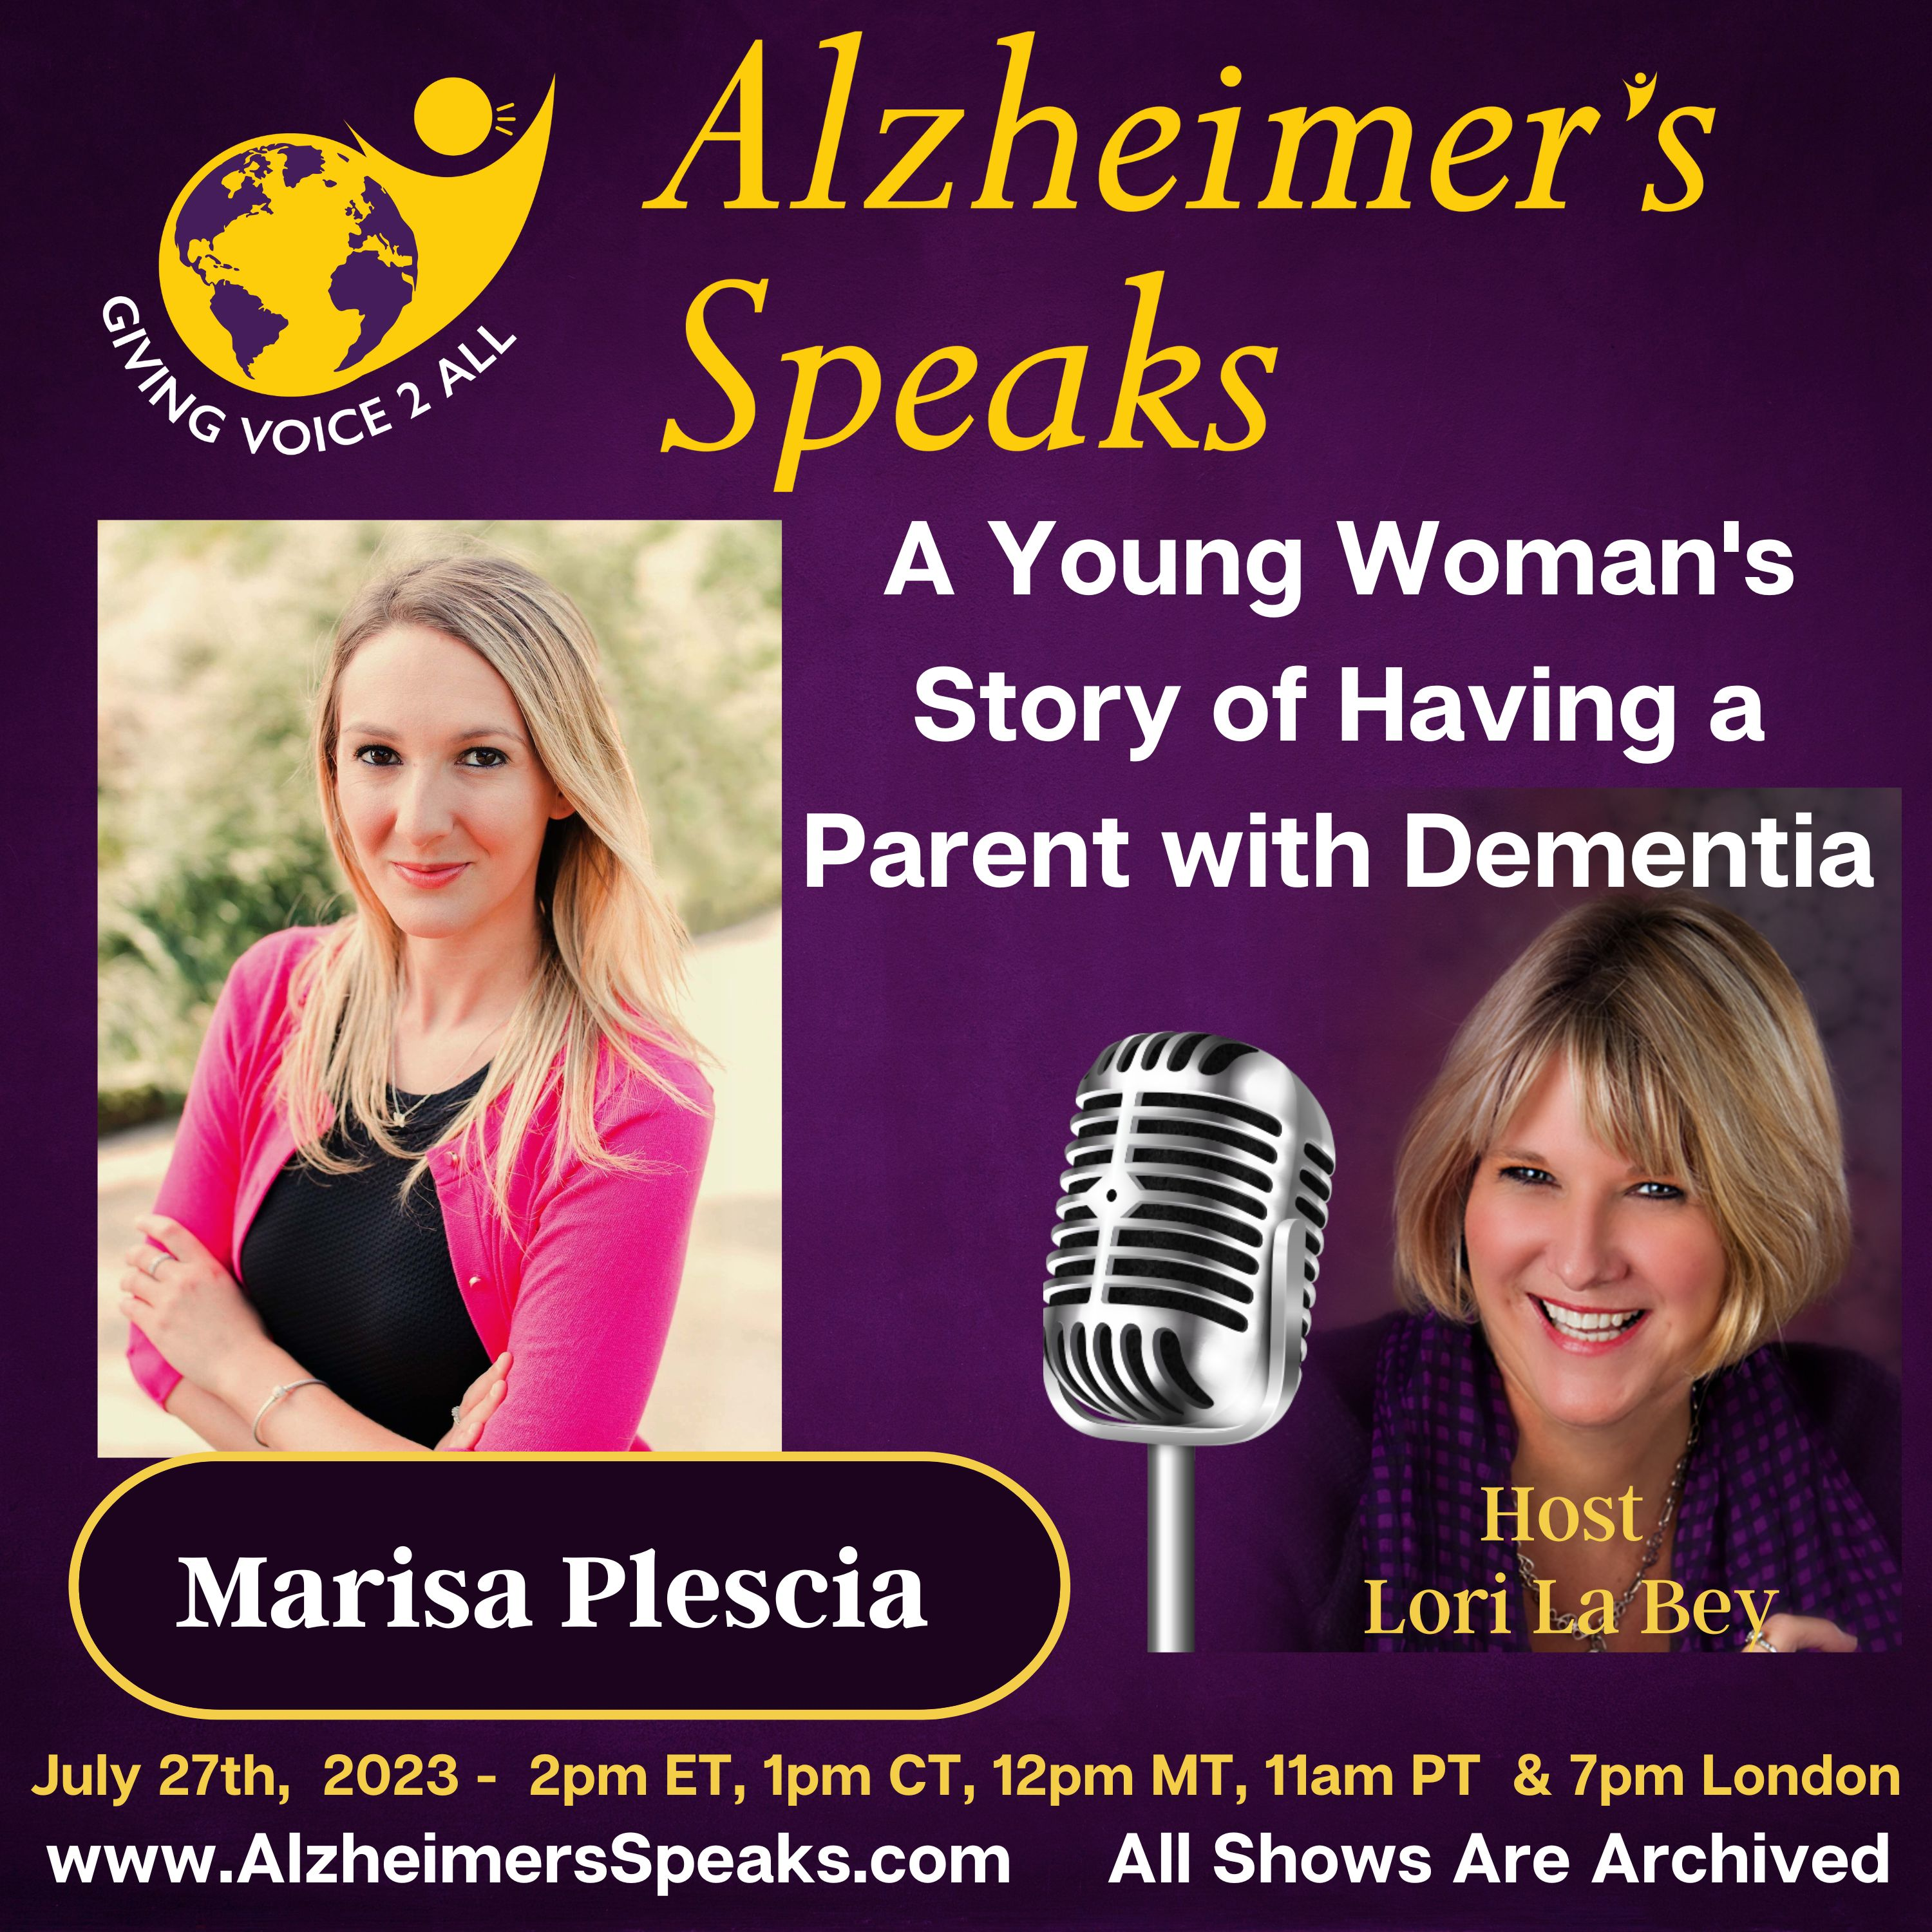 A Young Woman's Story of Having a Parent with Dementia